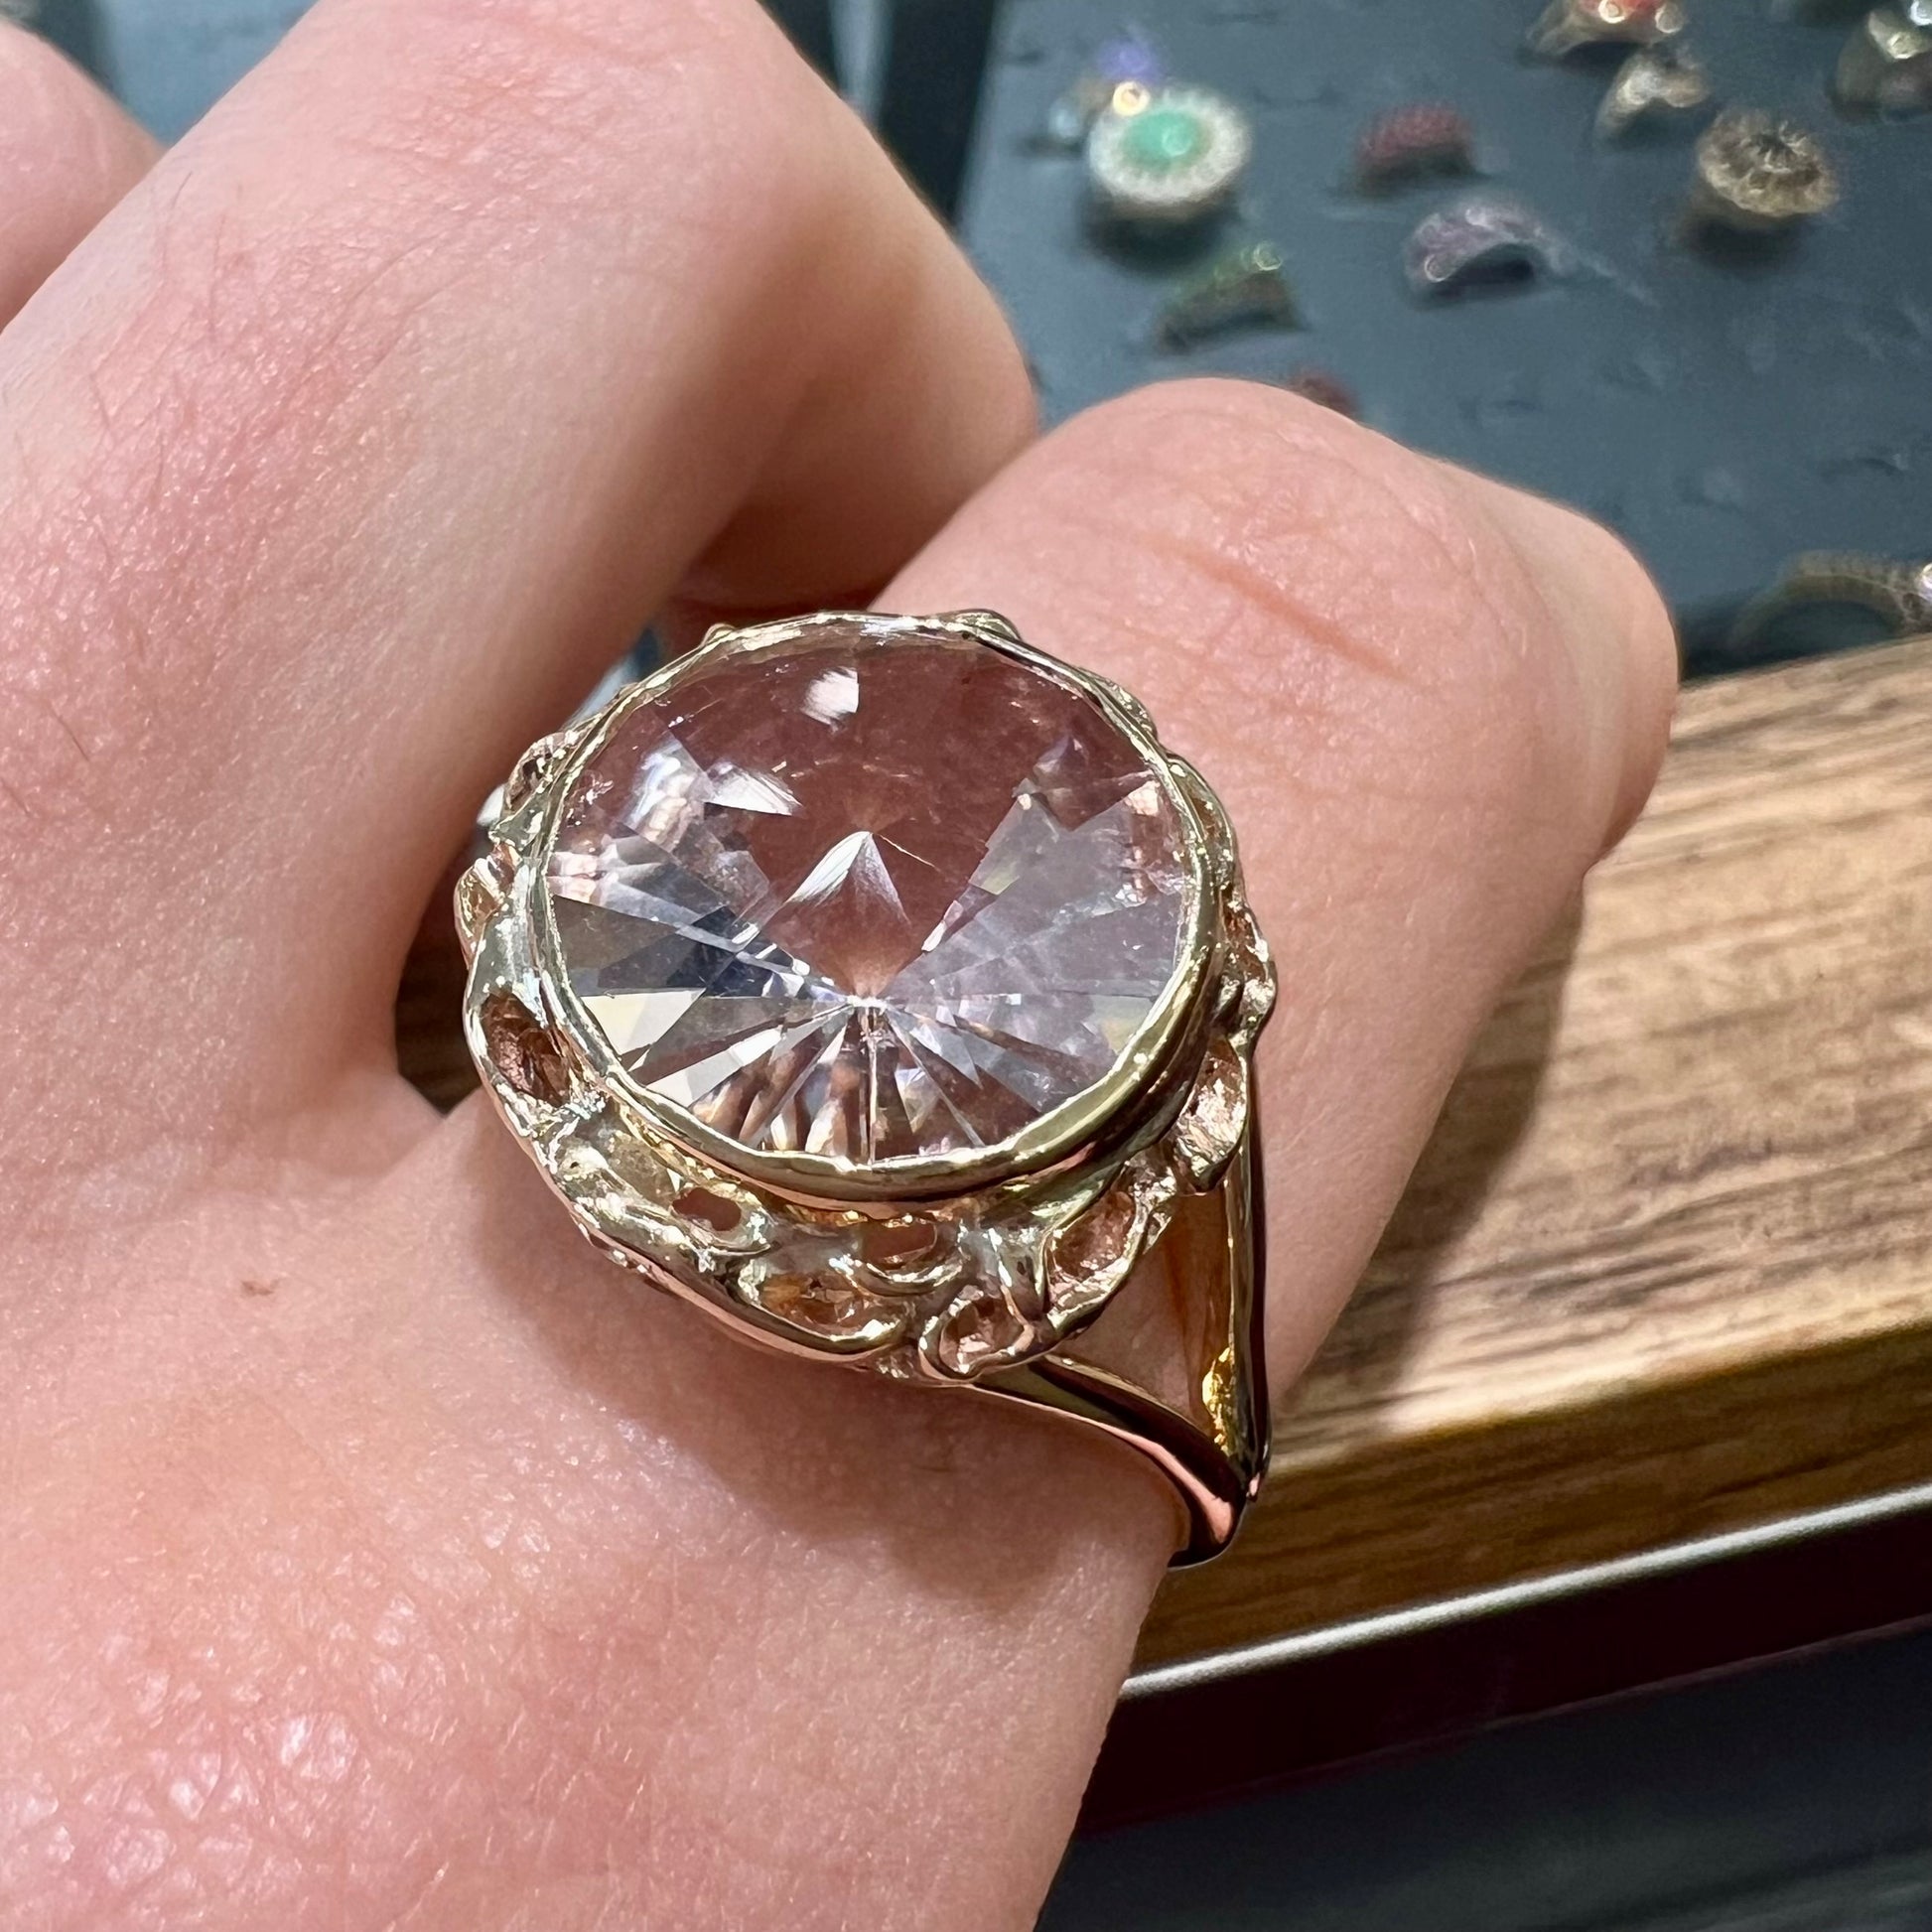 A ladies' yellow gold solitaire ring bezel set with a modified bud cut morganite gemstone.